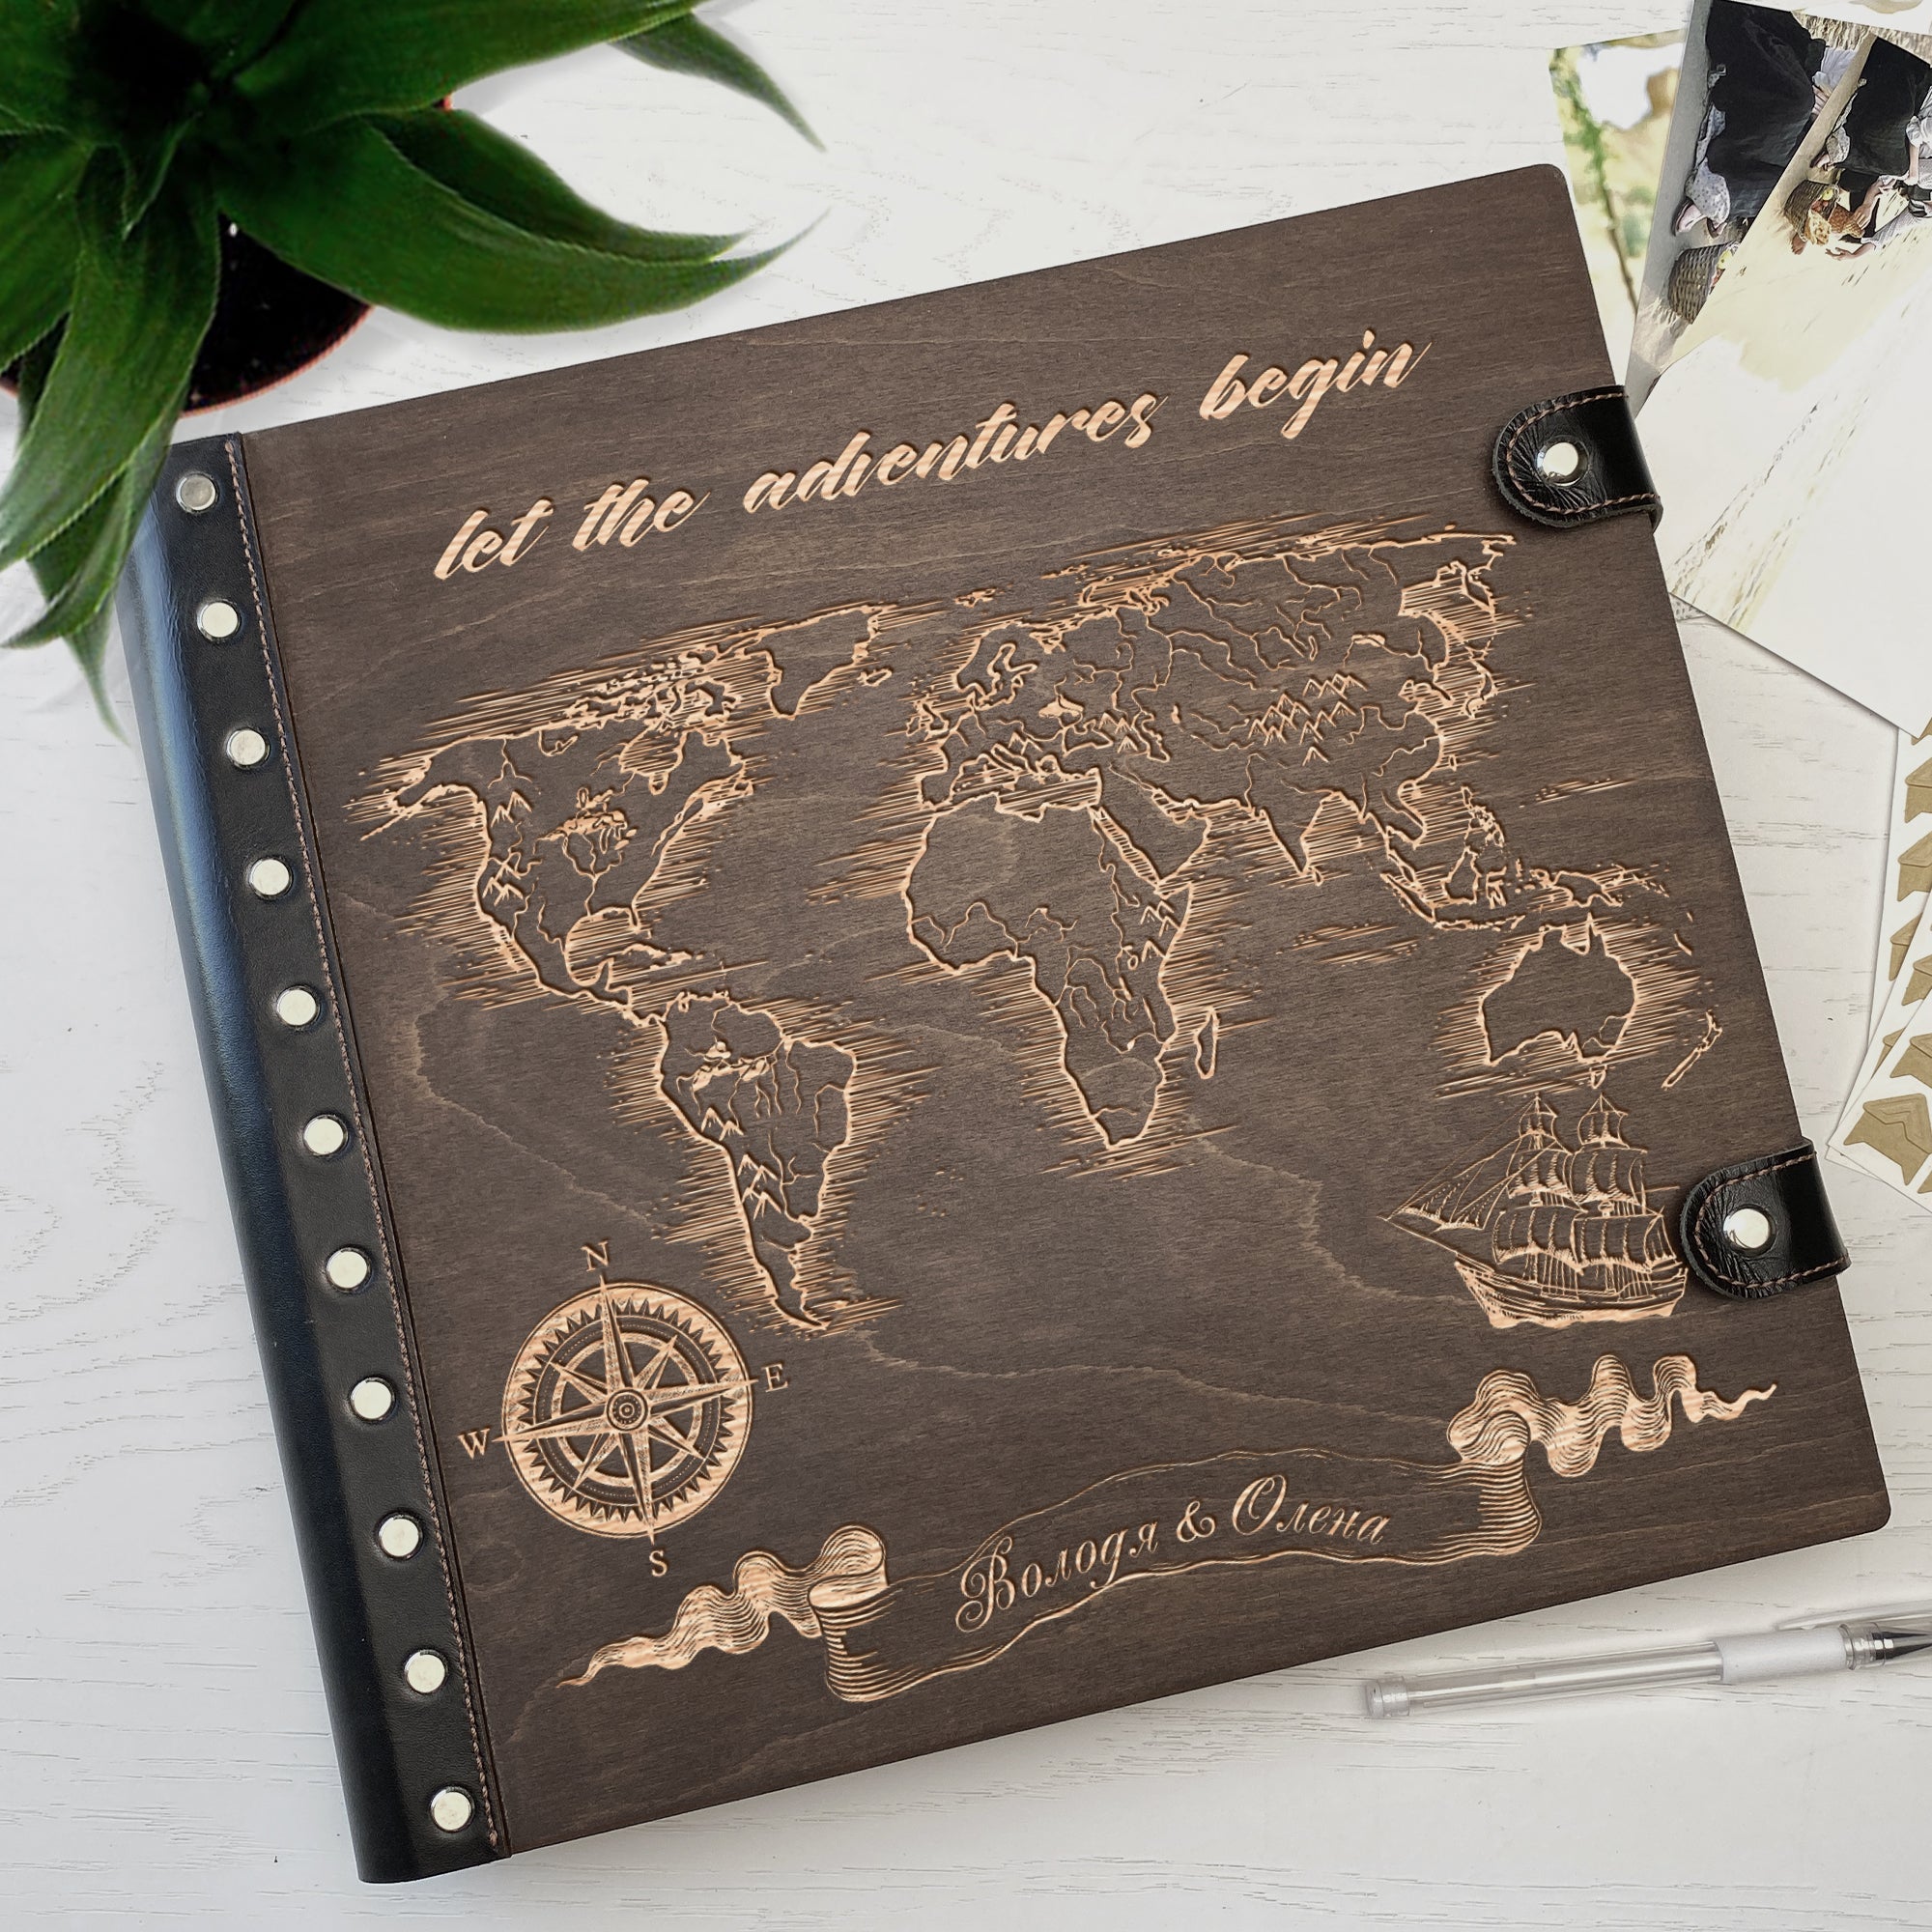 Personalized photo album with leather cover and Map-Mountains engraving